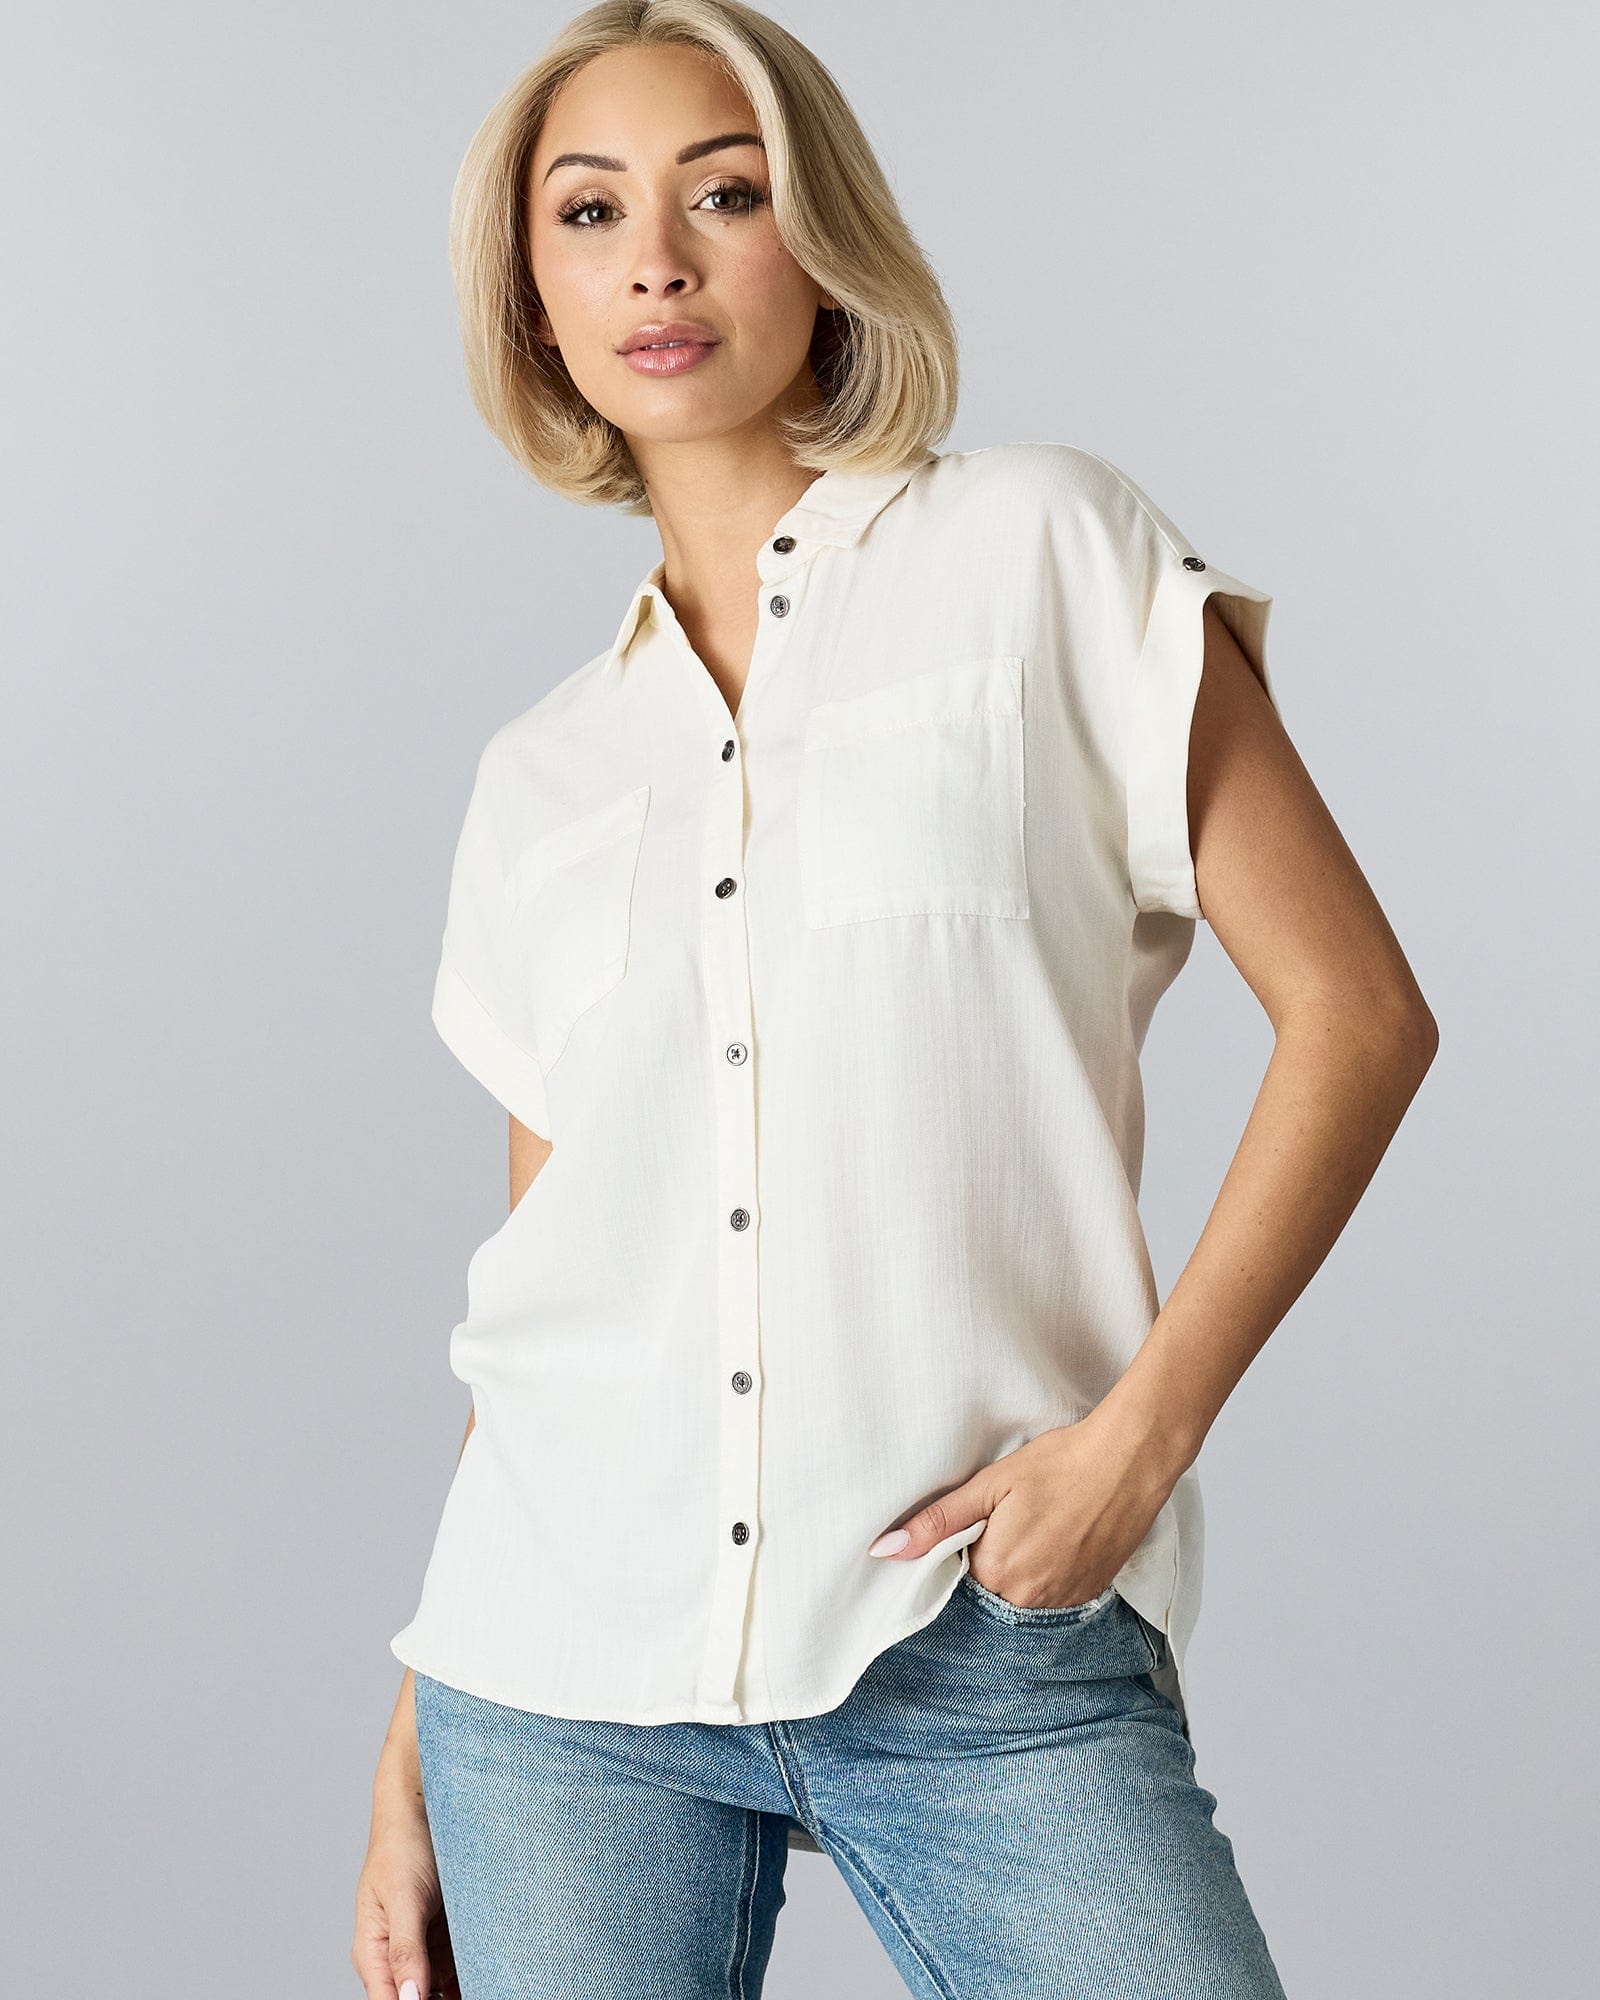 Woman in a short sleeved, button-down blouse with a collar and two chest pockets.